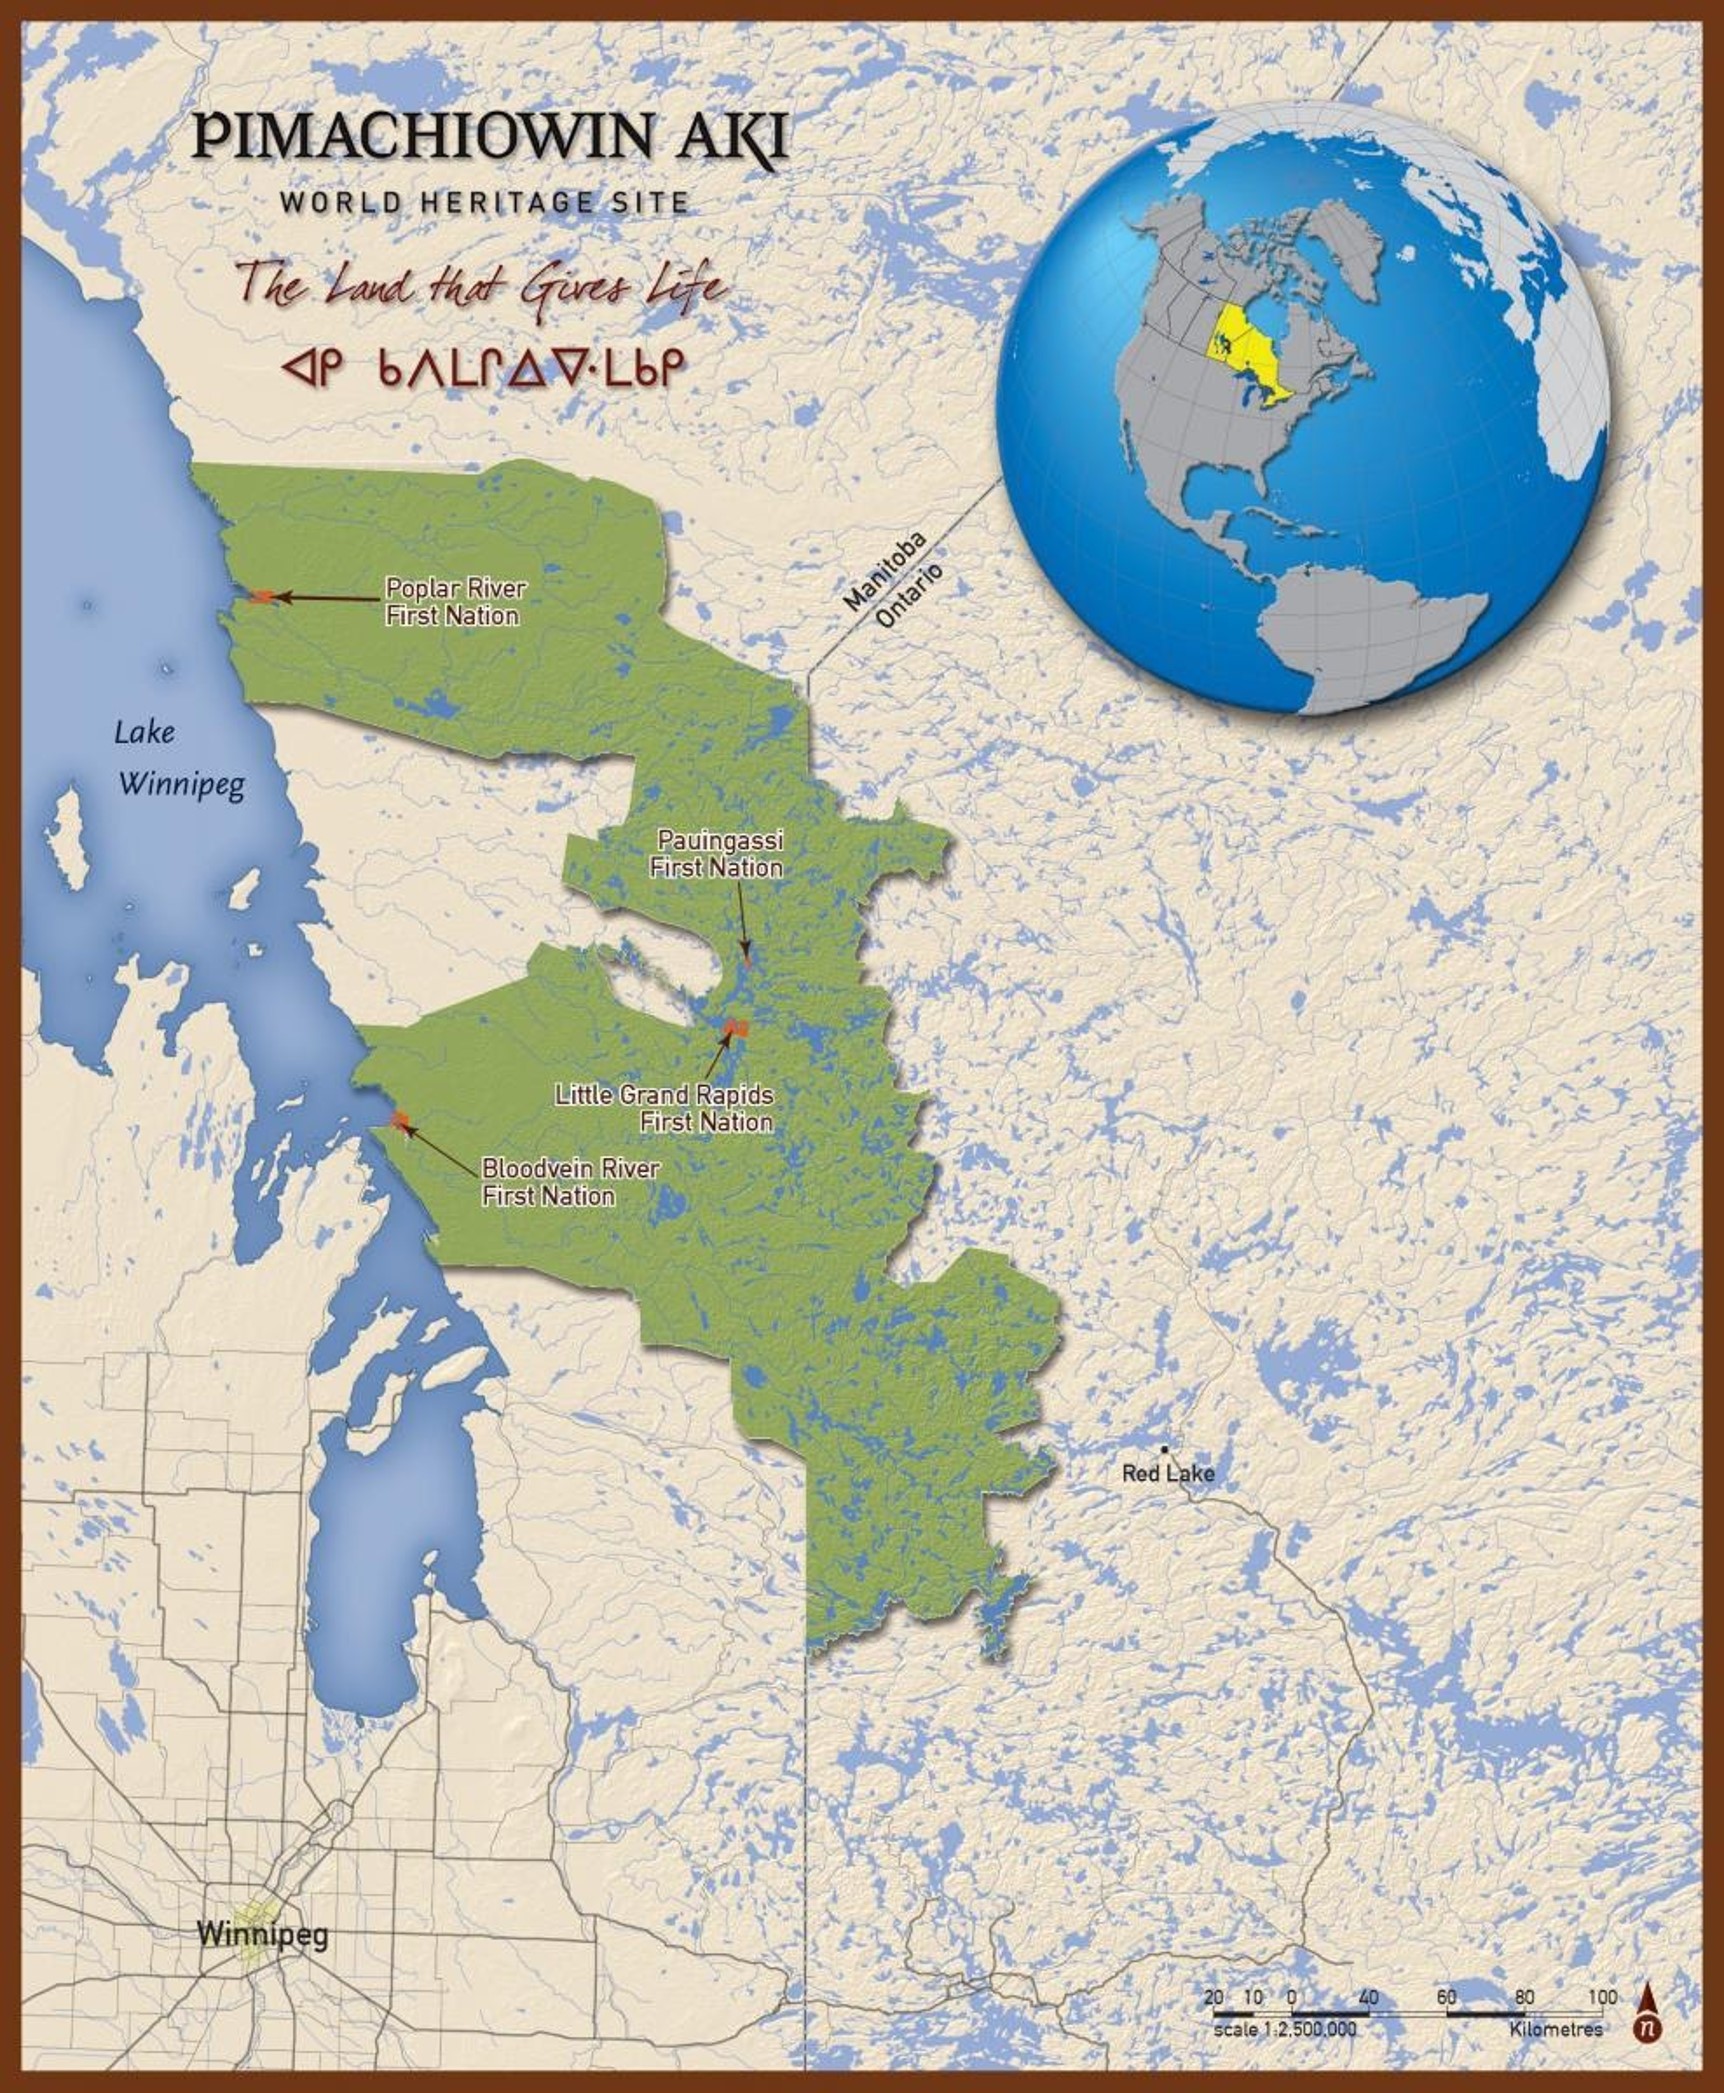 This map shows Pimachiowin Aki as an irregular-shaped area to the east of Lake Winnipeg. It includes about 50 km of Lake Winnipeg shoreline, in two places. The total area of Pimachiowin Aki seems to be the same as the total area of Lake Winnipeg, though Pimachiowin Aki doesn't reach as far north. There are many lakes and rivers within Pimachiowin Aki.